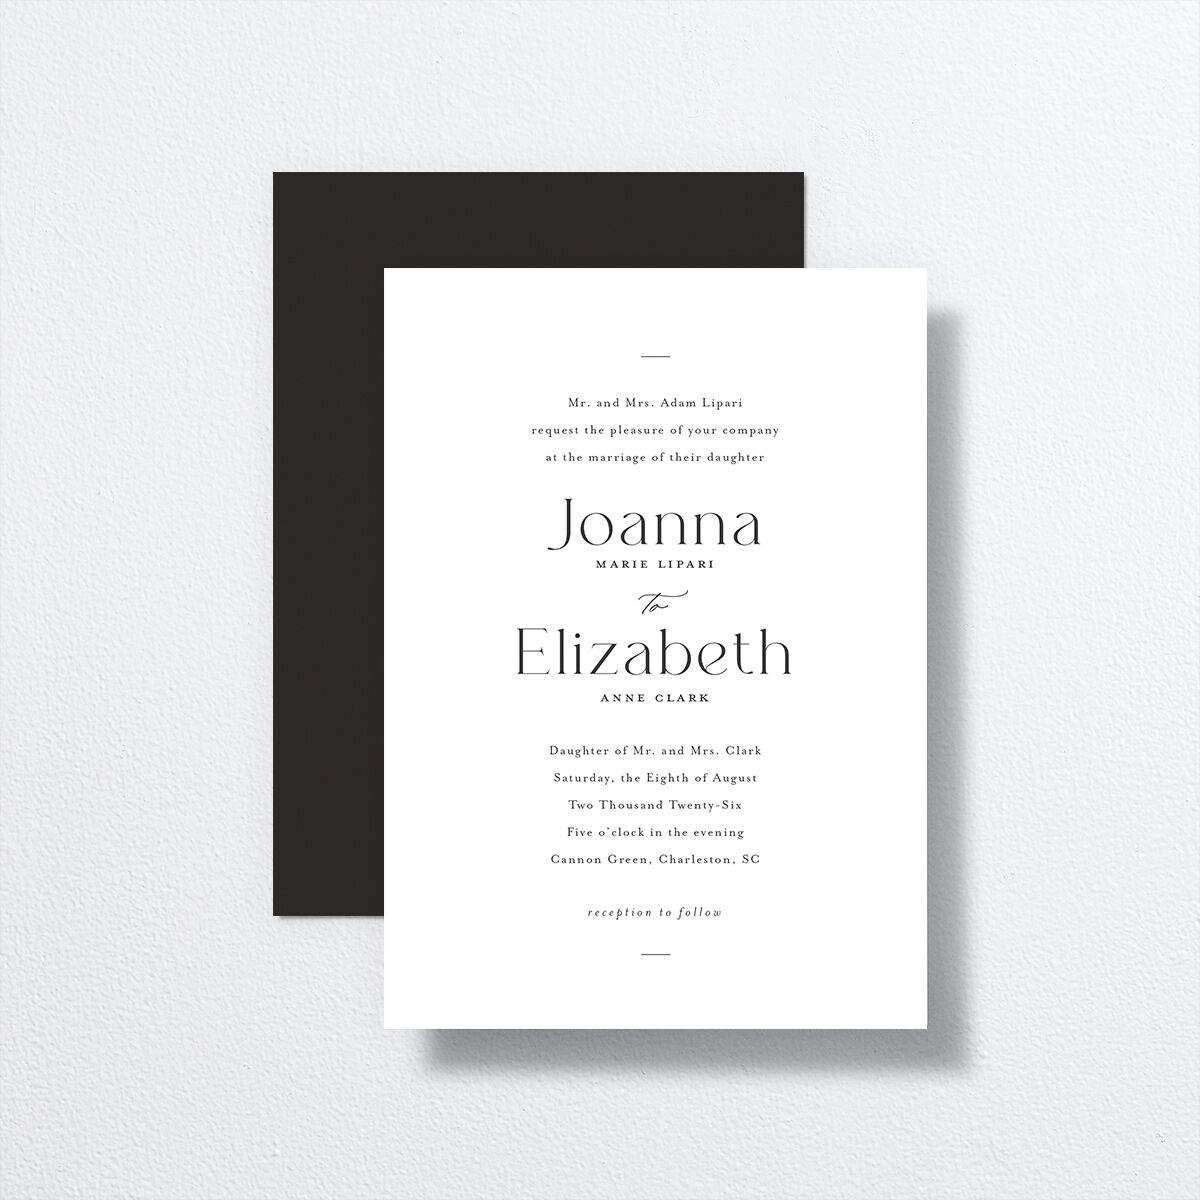 Refined Wedding Invitations front-and-back in white